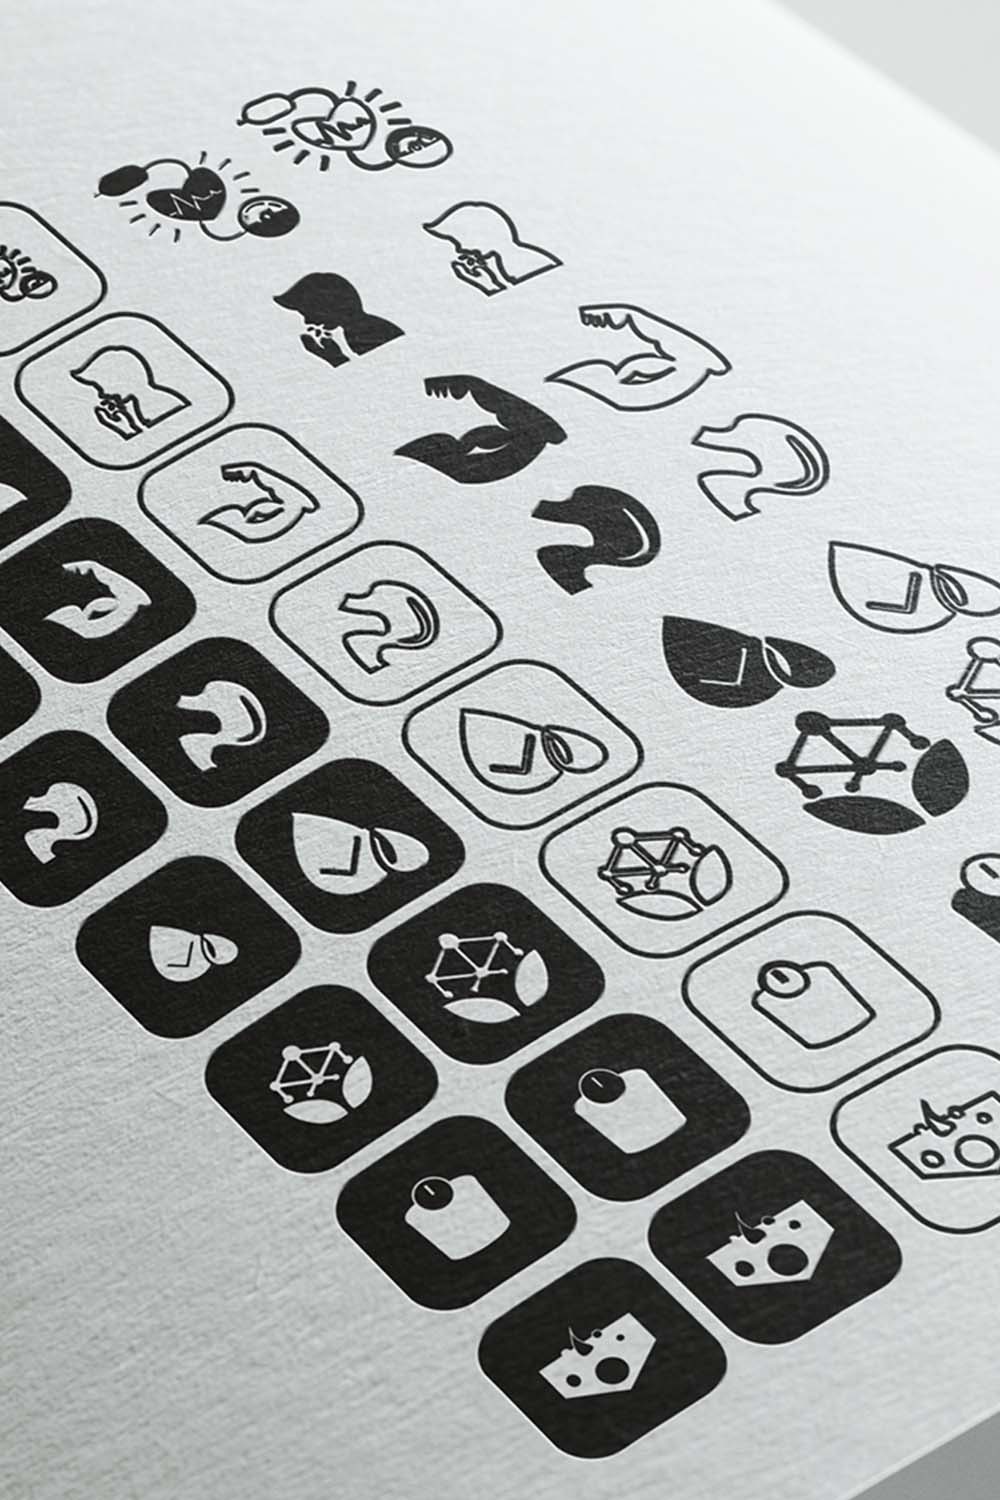 35 Science and Health Icons Bundle pinterest image.